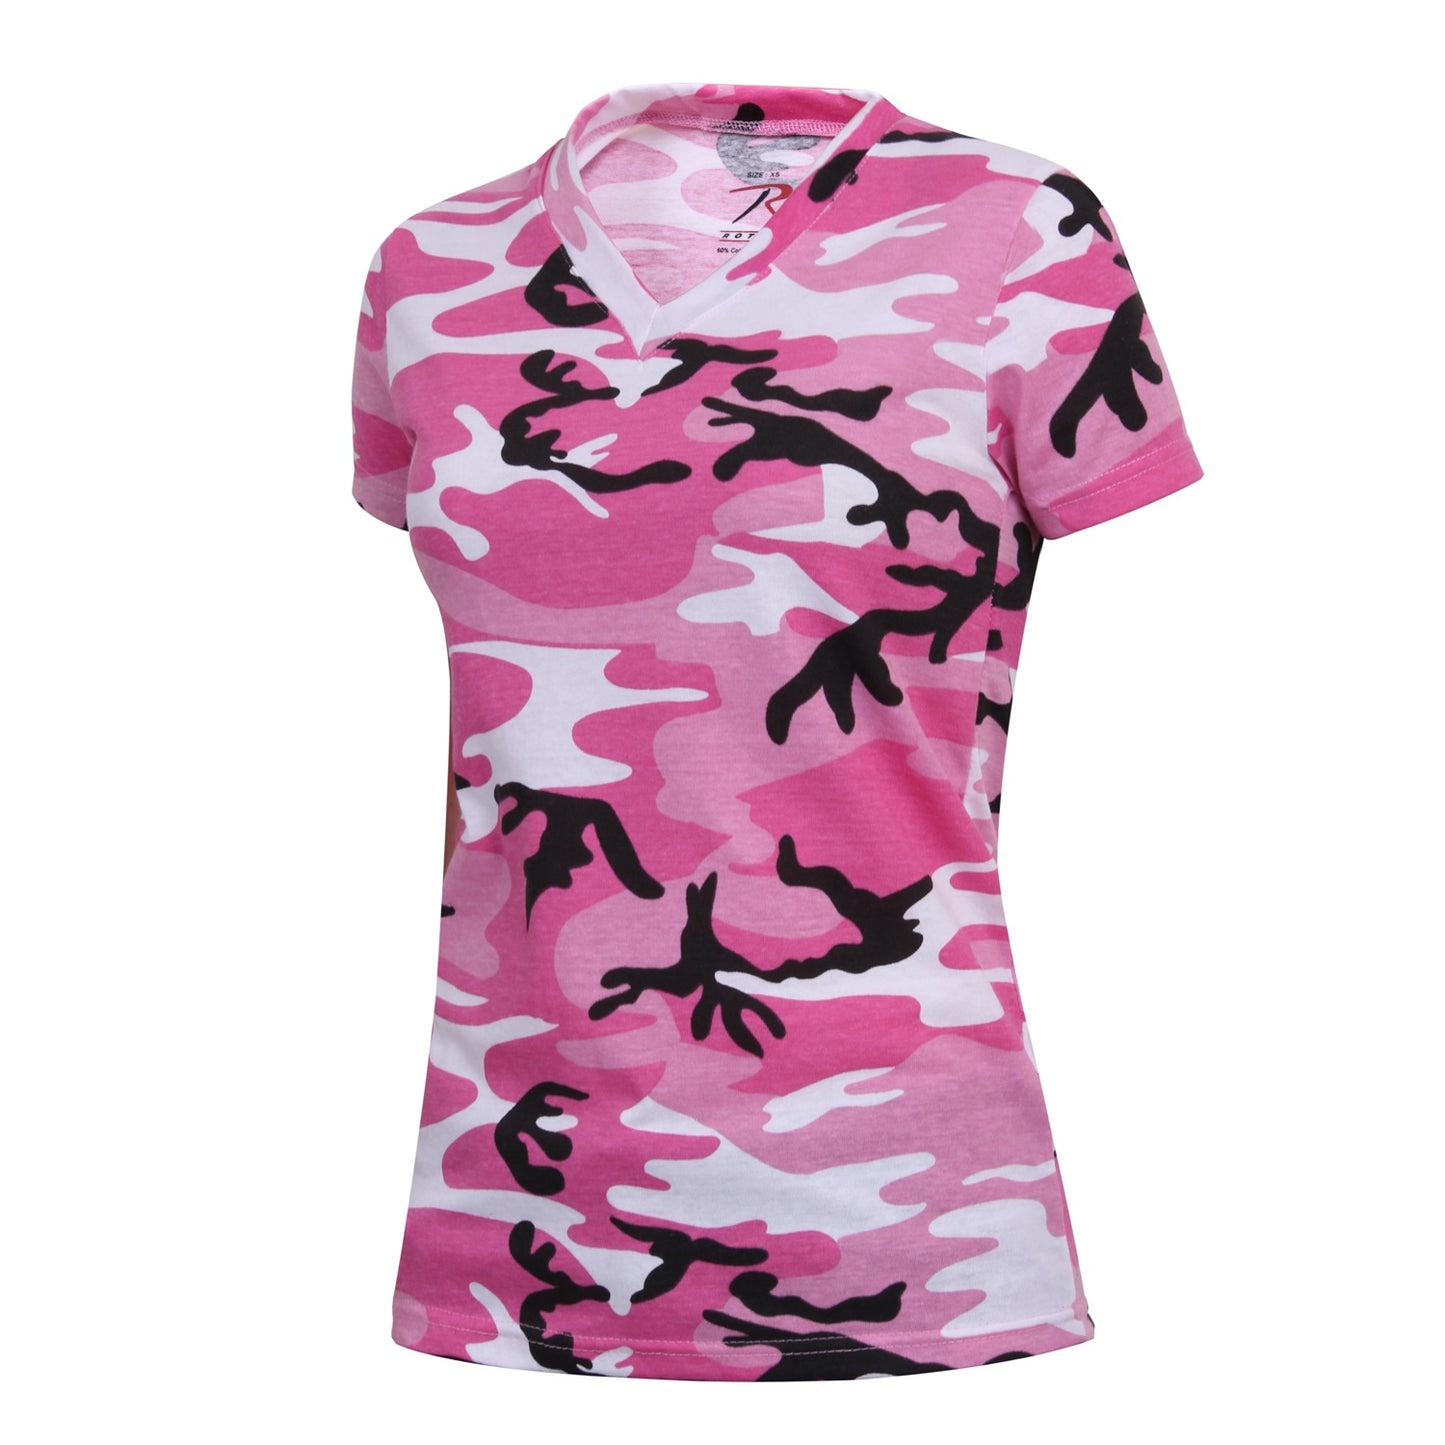 Women's Long Length Camo V-Neck T-Shirt - Rothco Woodland or Pink Camouflage Tee